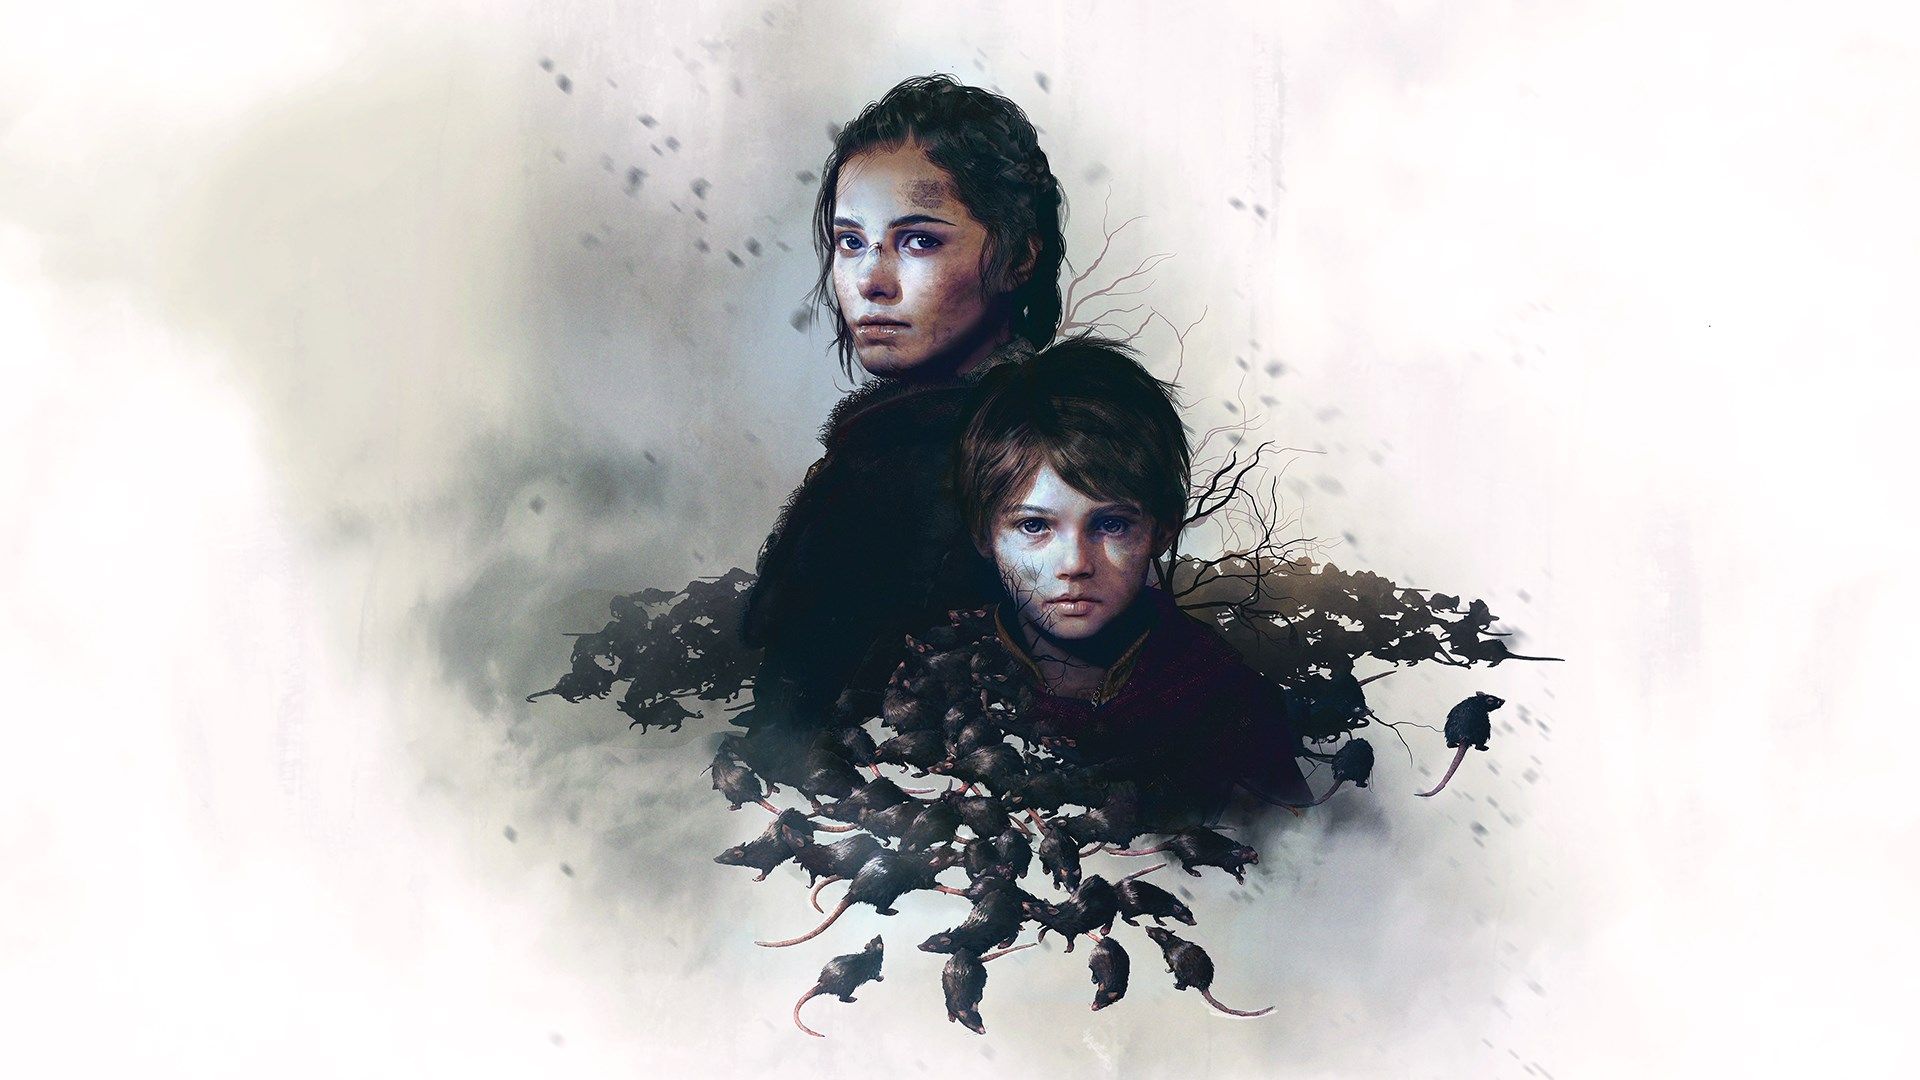 A Plague Tale: Innocence' is like 'Dishonored', if you squint